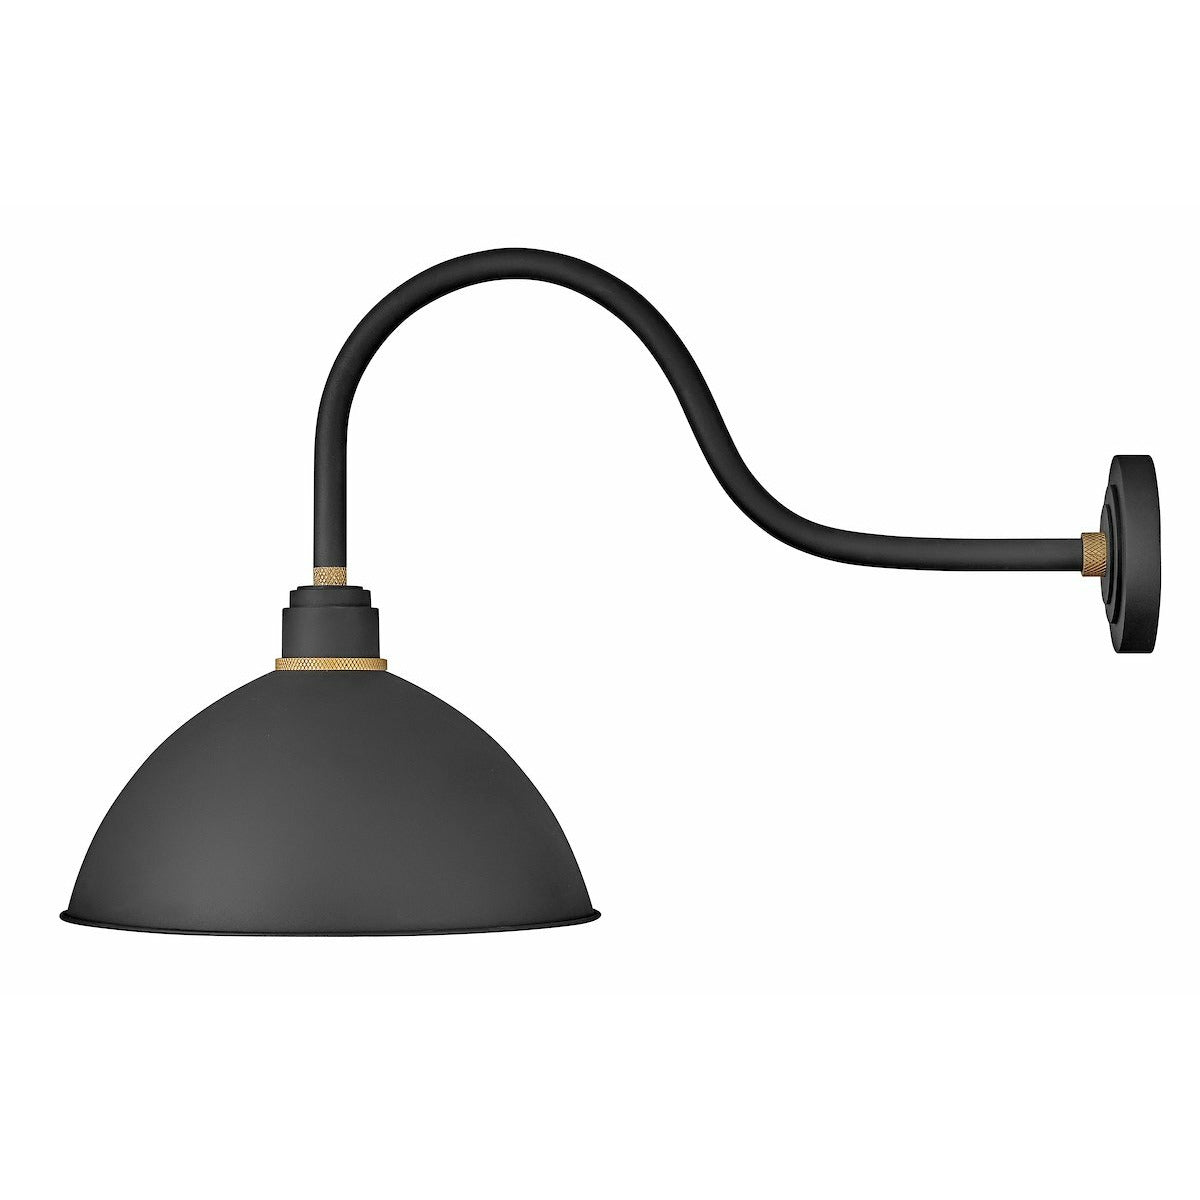 Foundry Dome Outdoor Wall Light Textured Black